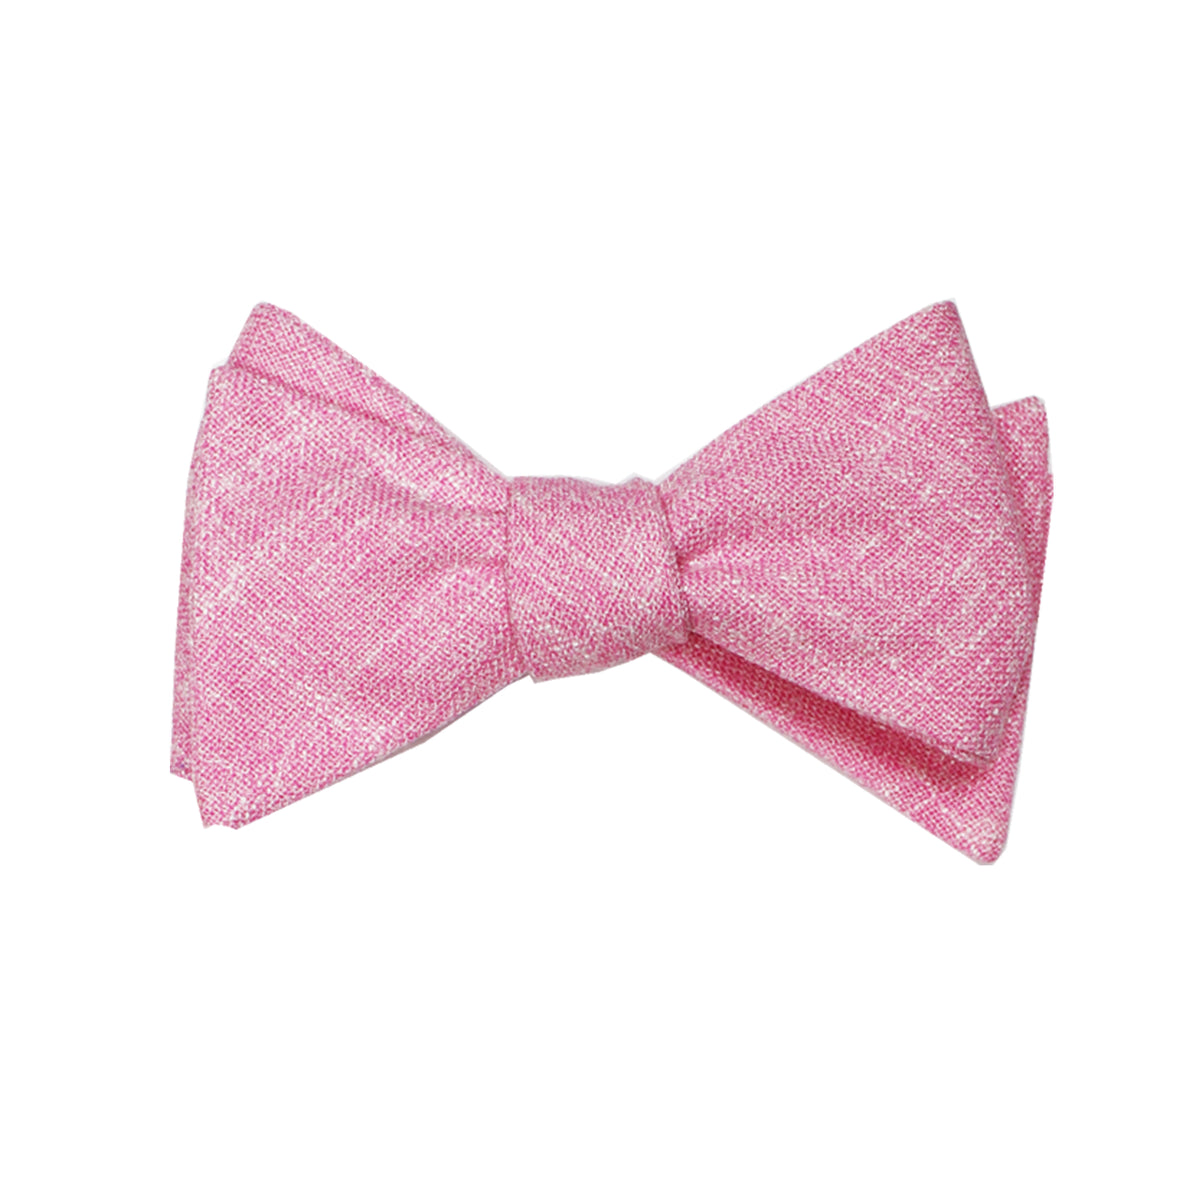 Heather Pink Bow Tie – The Art Institute of Chicago Museum Shop